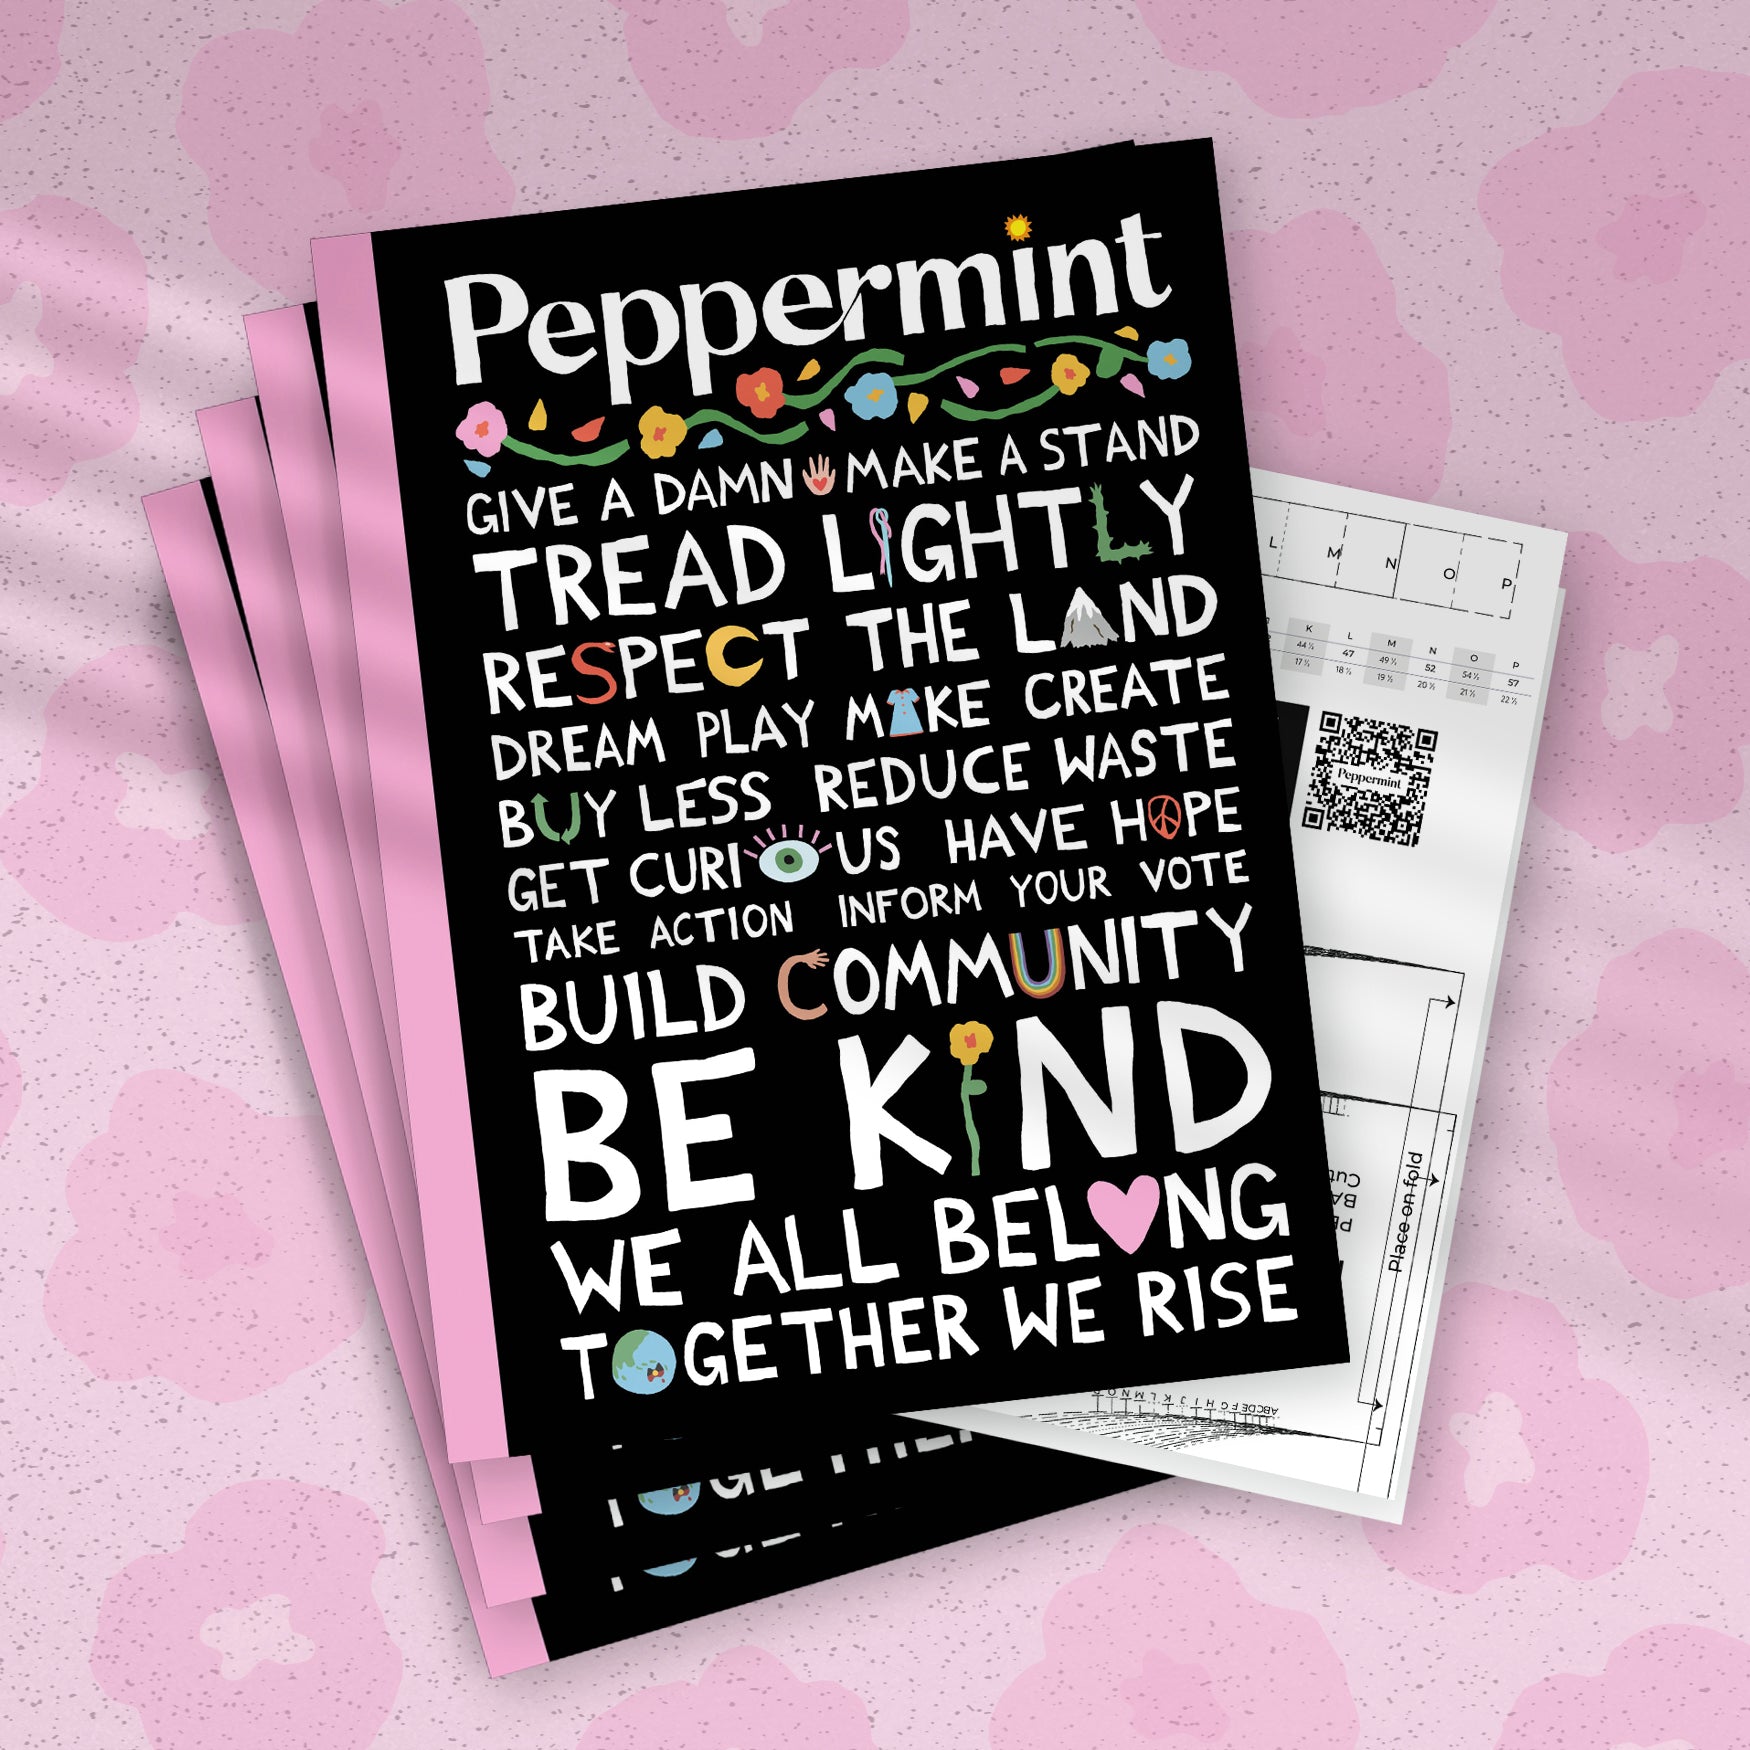 Peppermint Magazine Issue 60